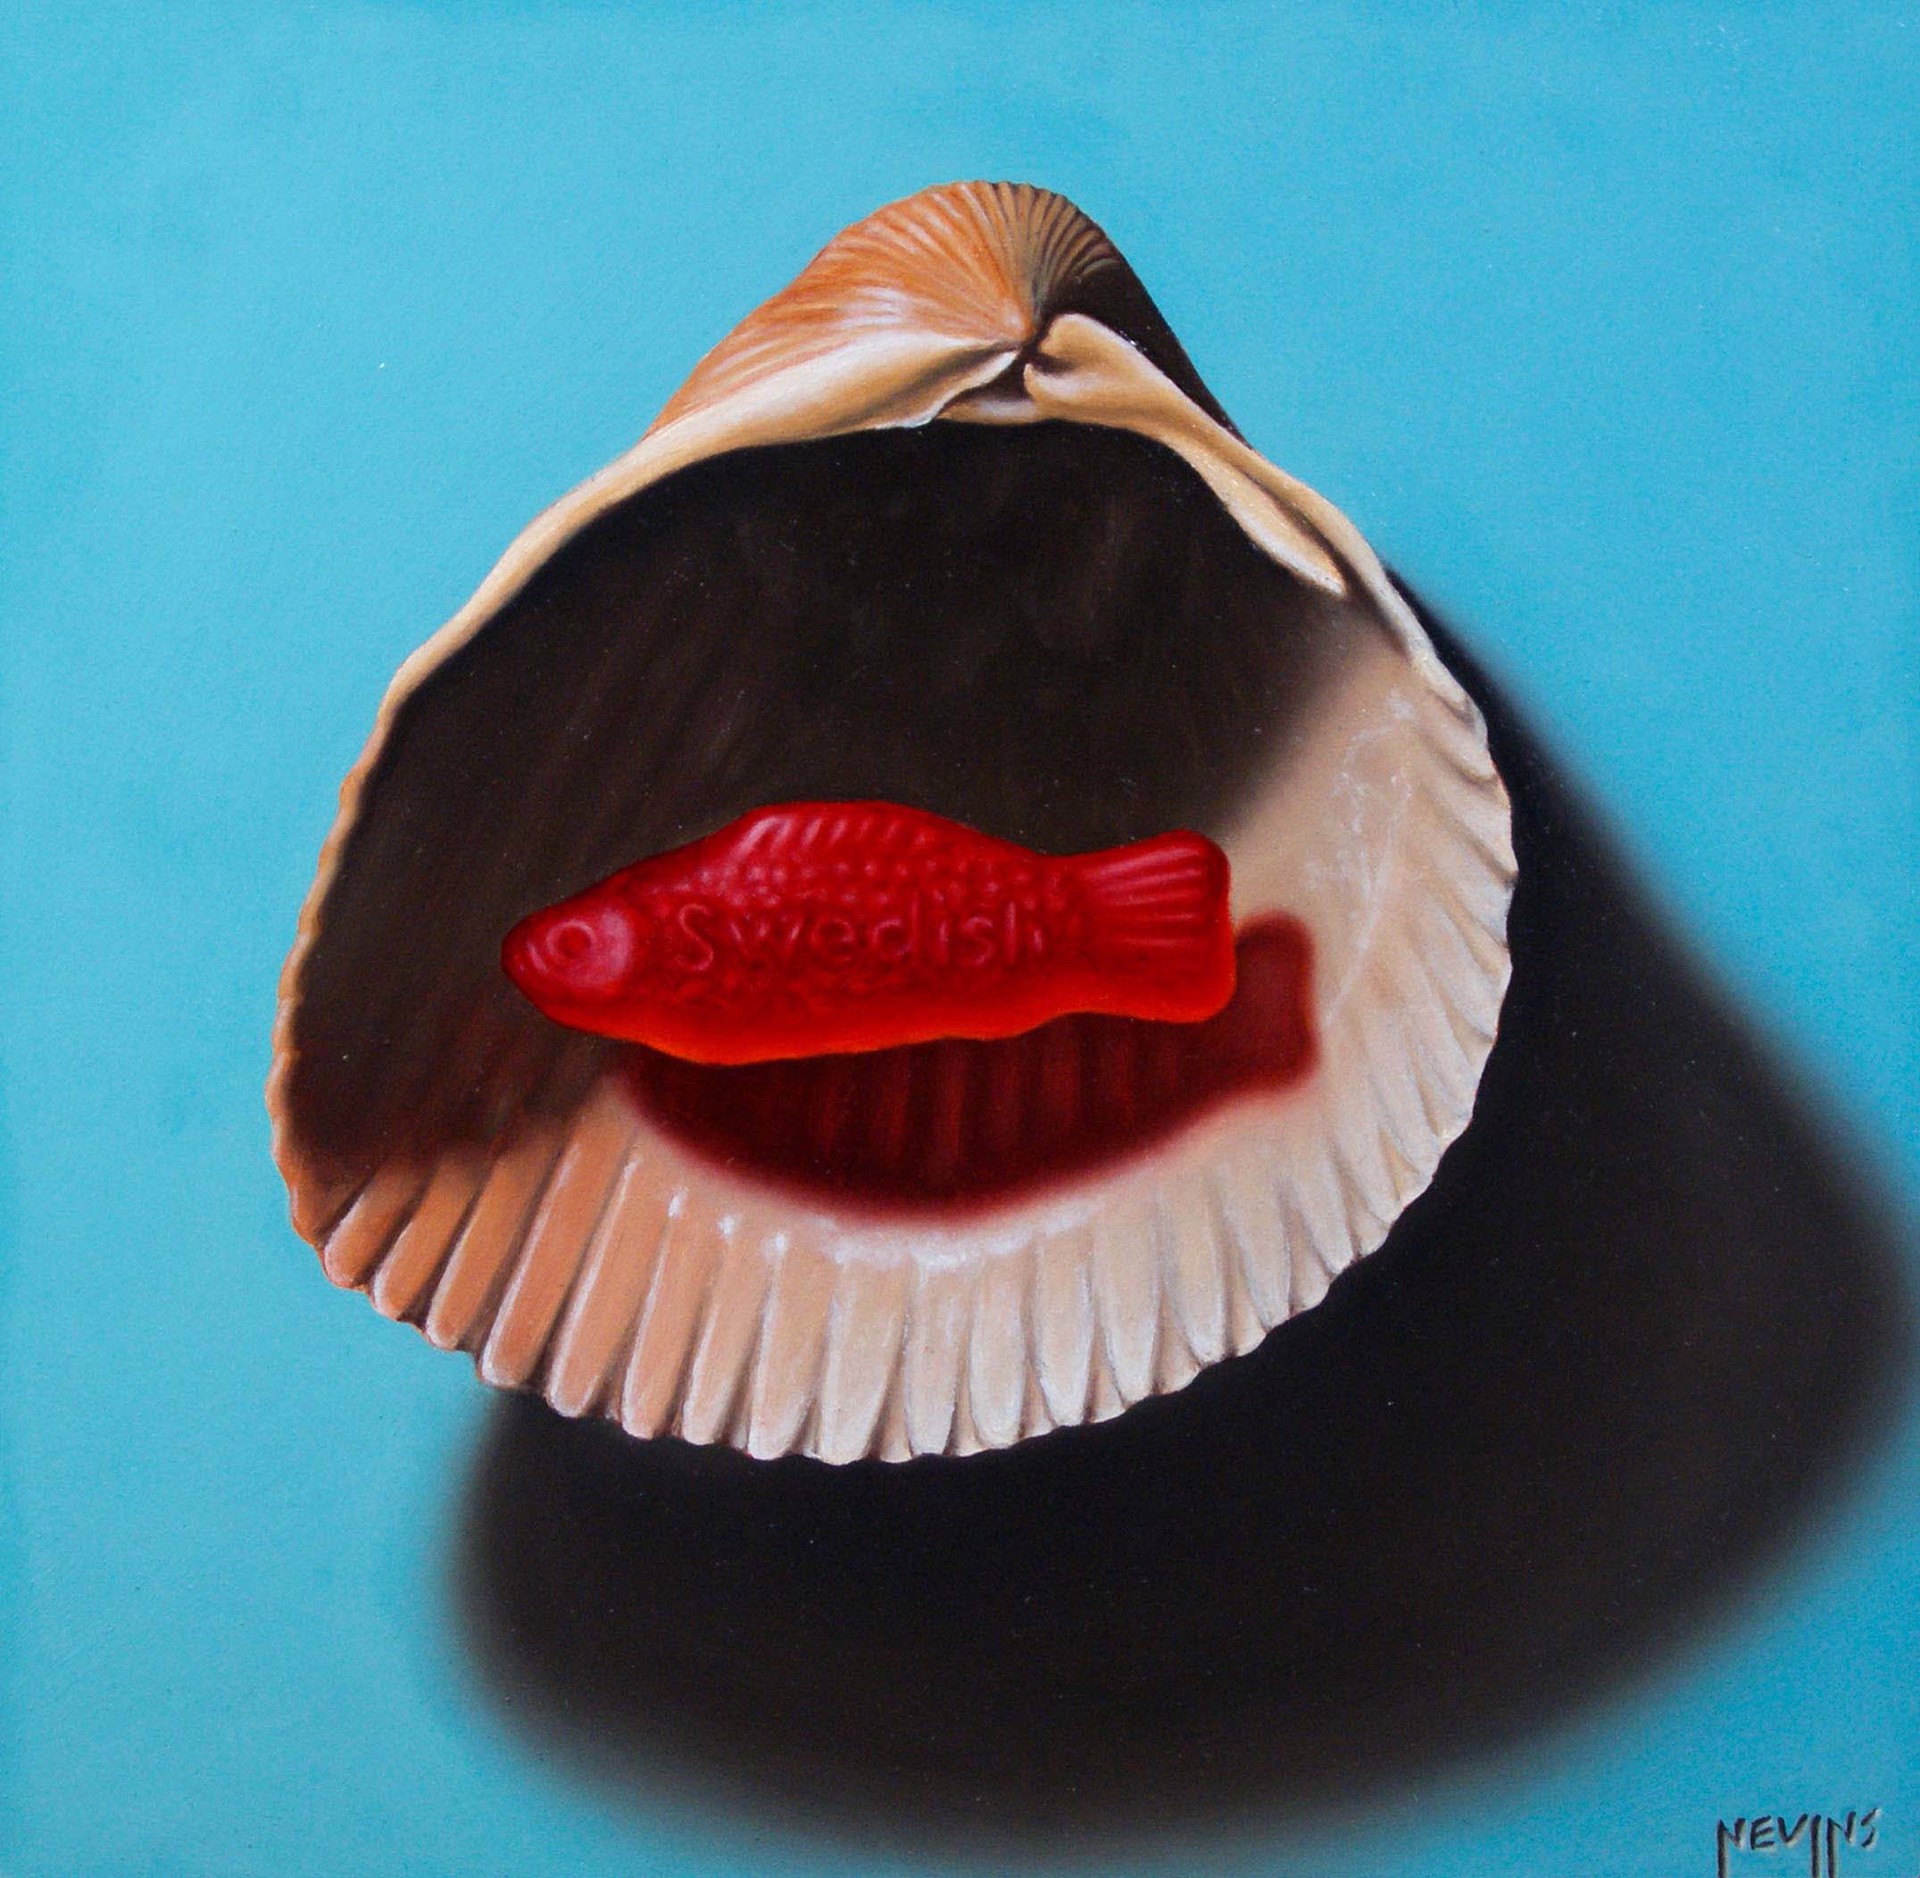 Shell Fish by Patrick Nevins